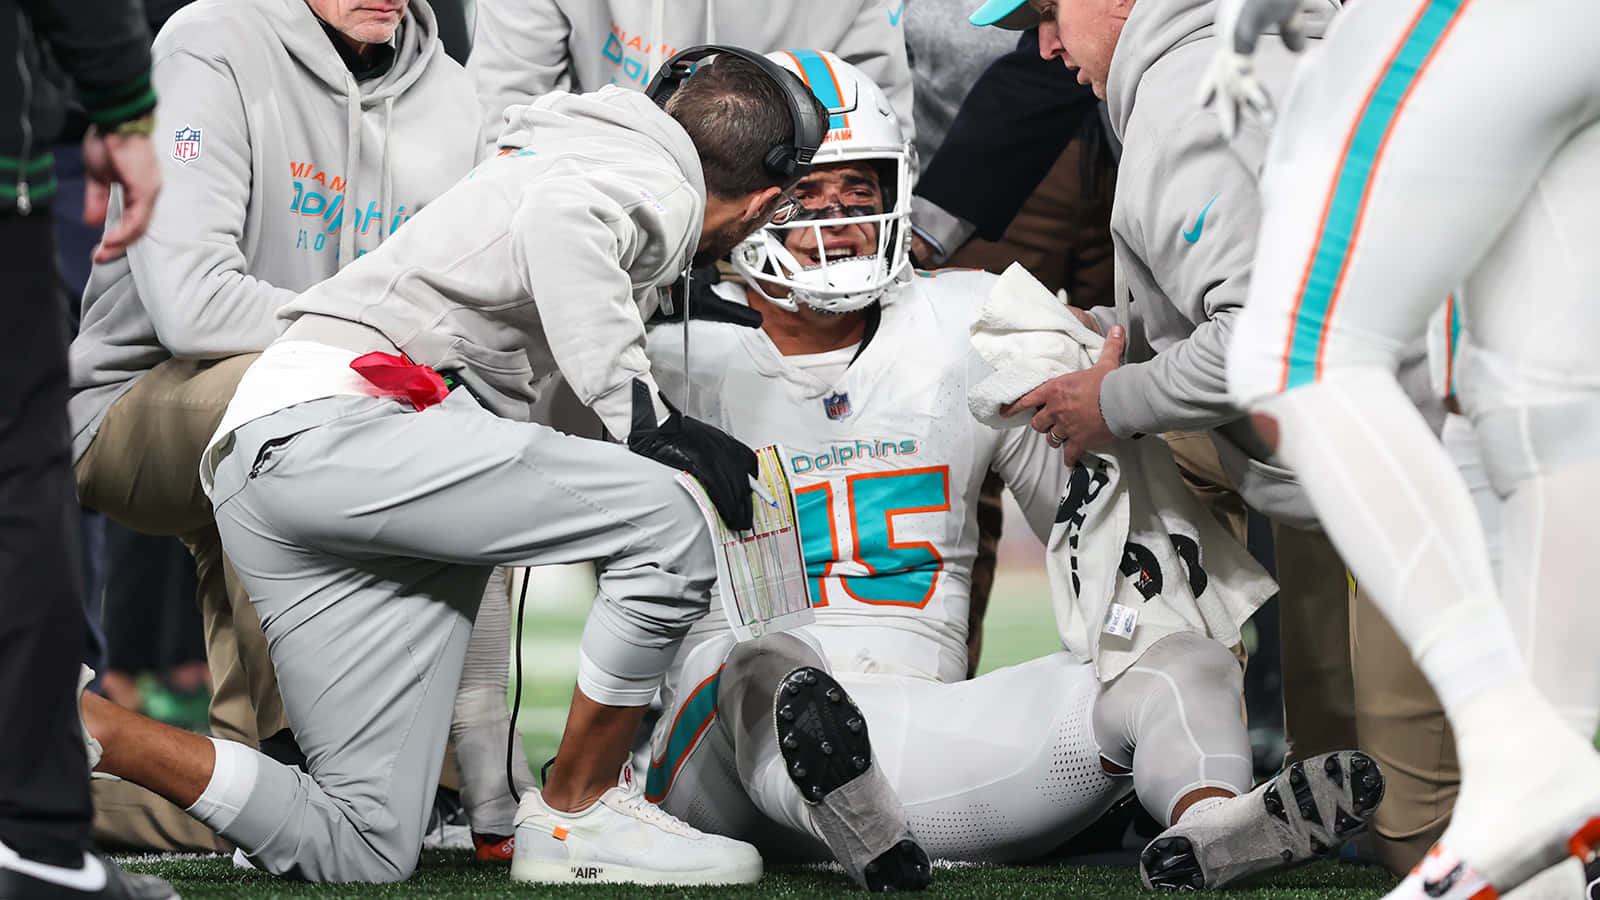 Injured Dolphins Player Consoledby Coach Wallpaper